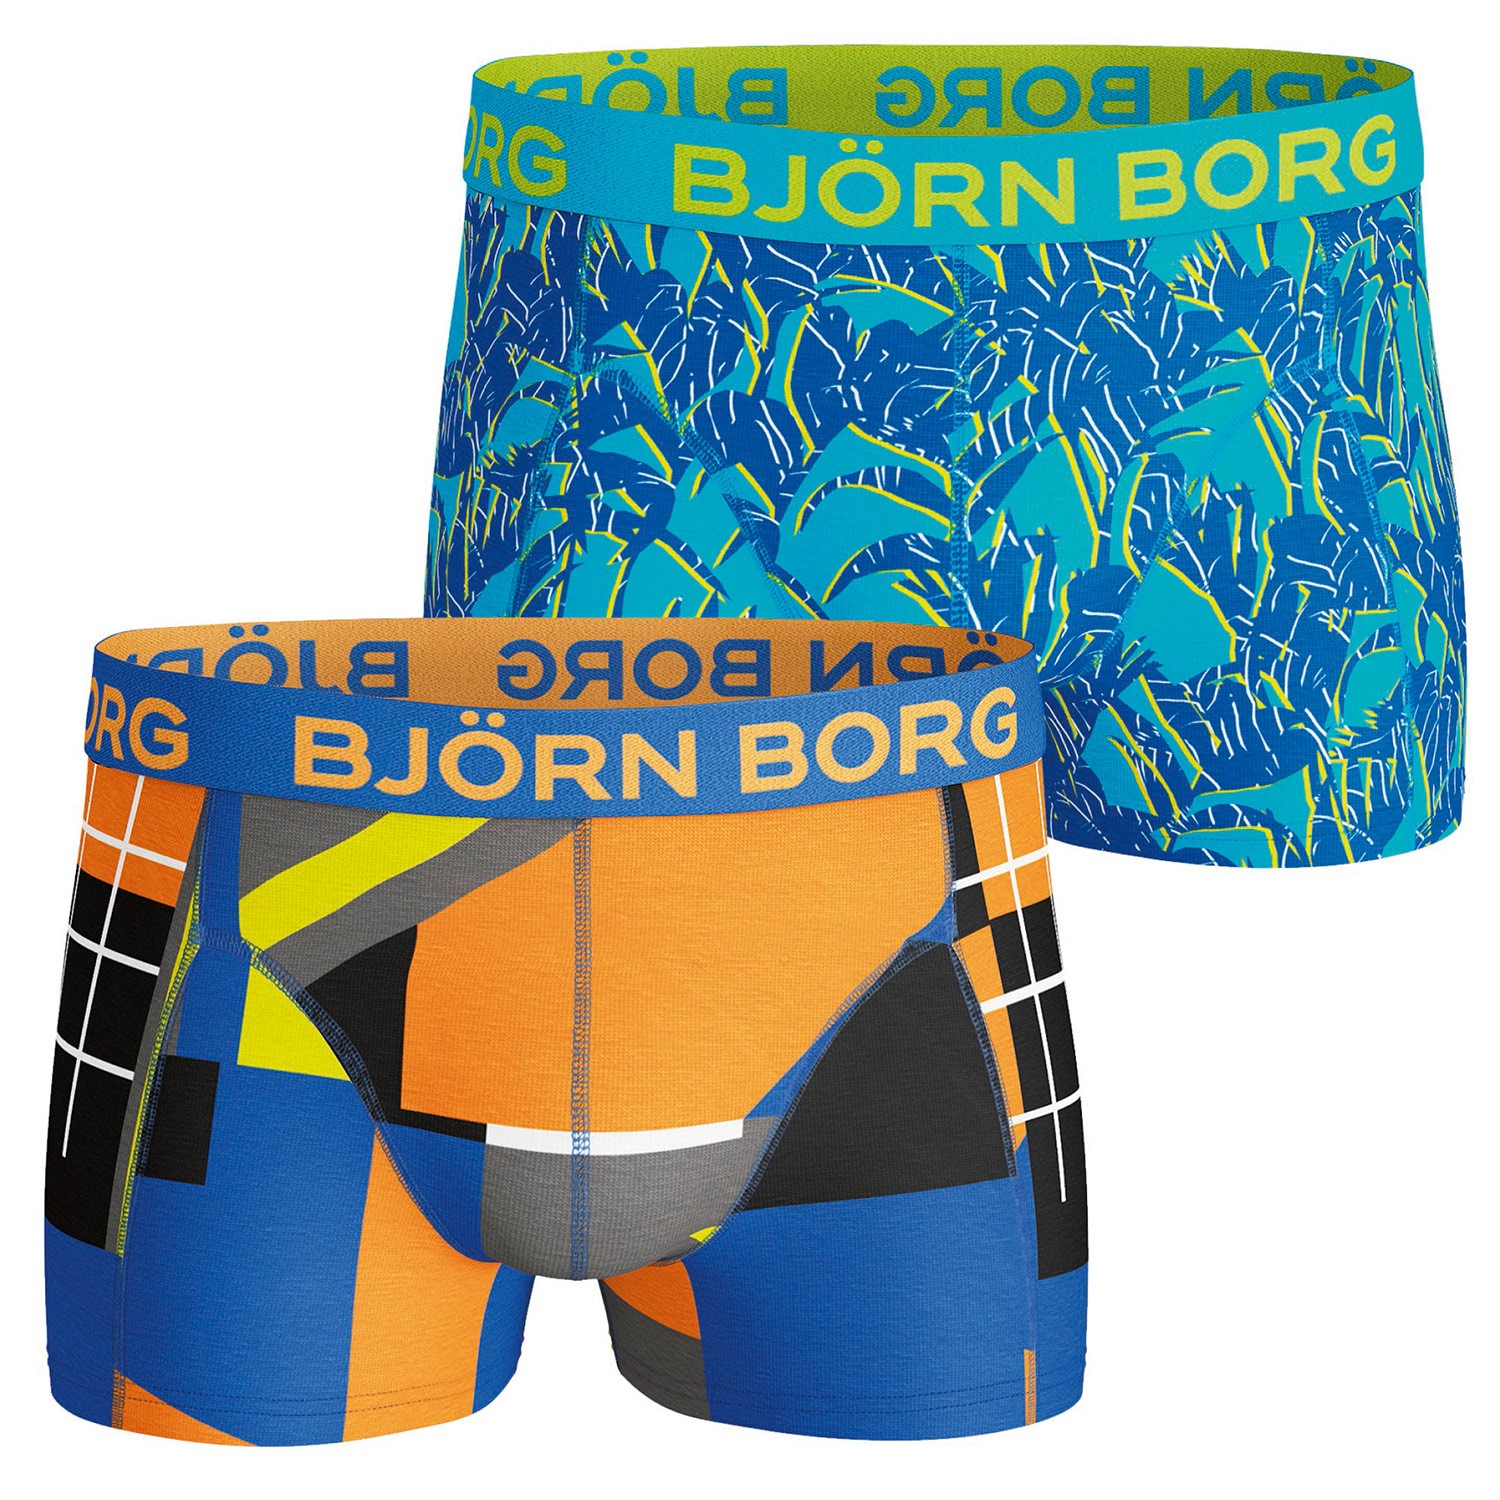 Björn Borg Short Shorts Multi Collage and Tropical